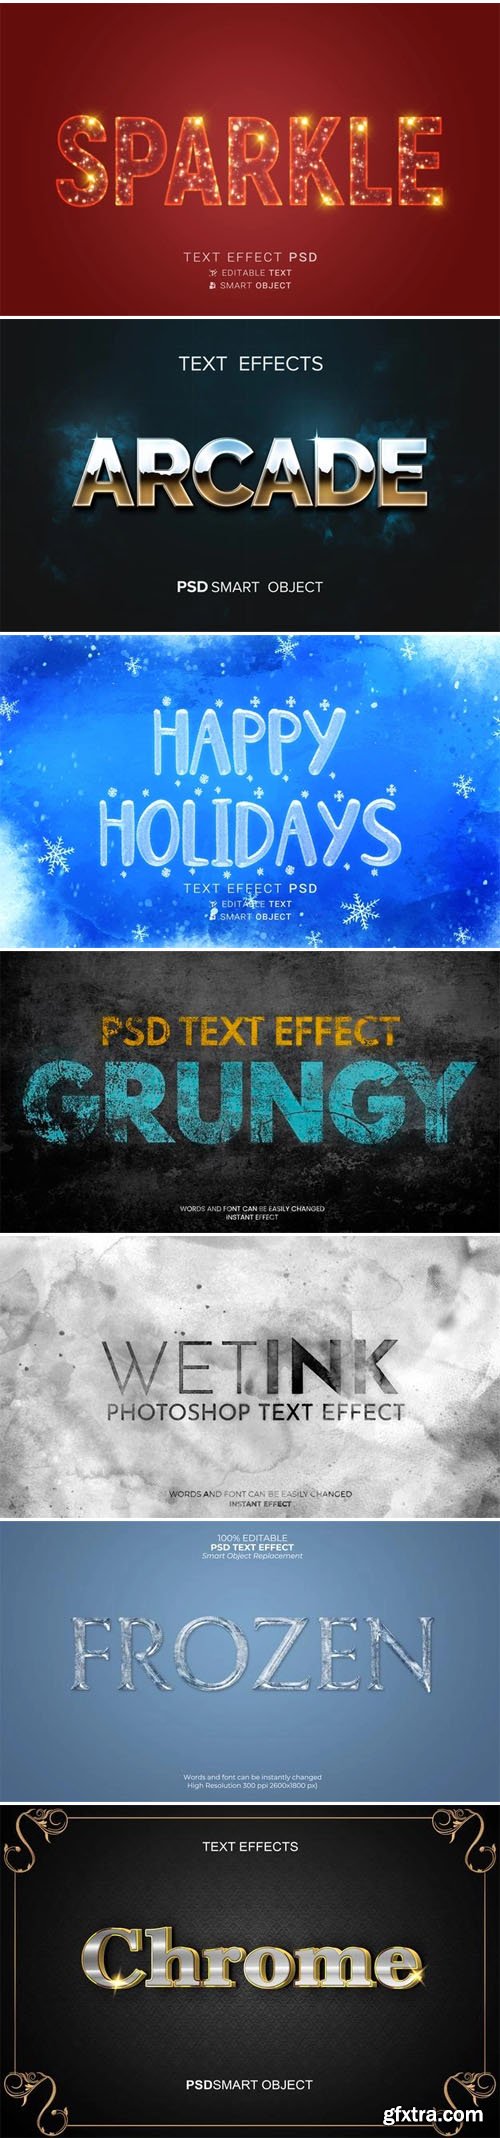 14 Modern Text Effects PSD Templates Collection